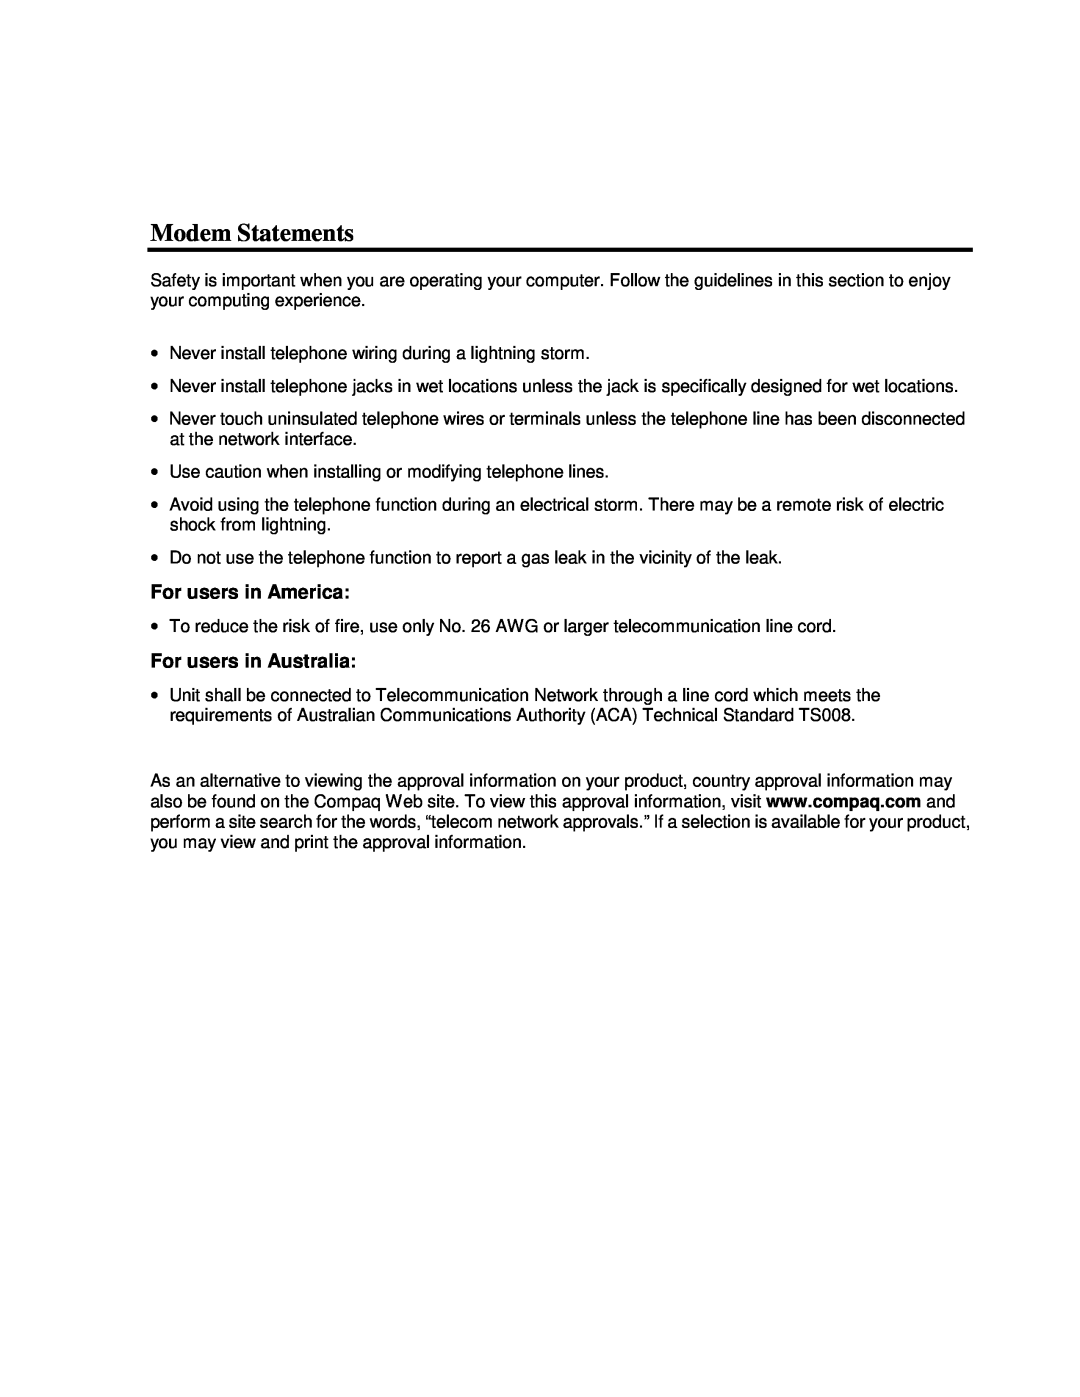 HP 80XL302 manual Modem Statements, For users in America, For users in Australia 